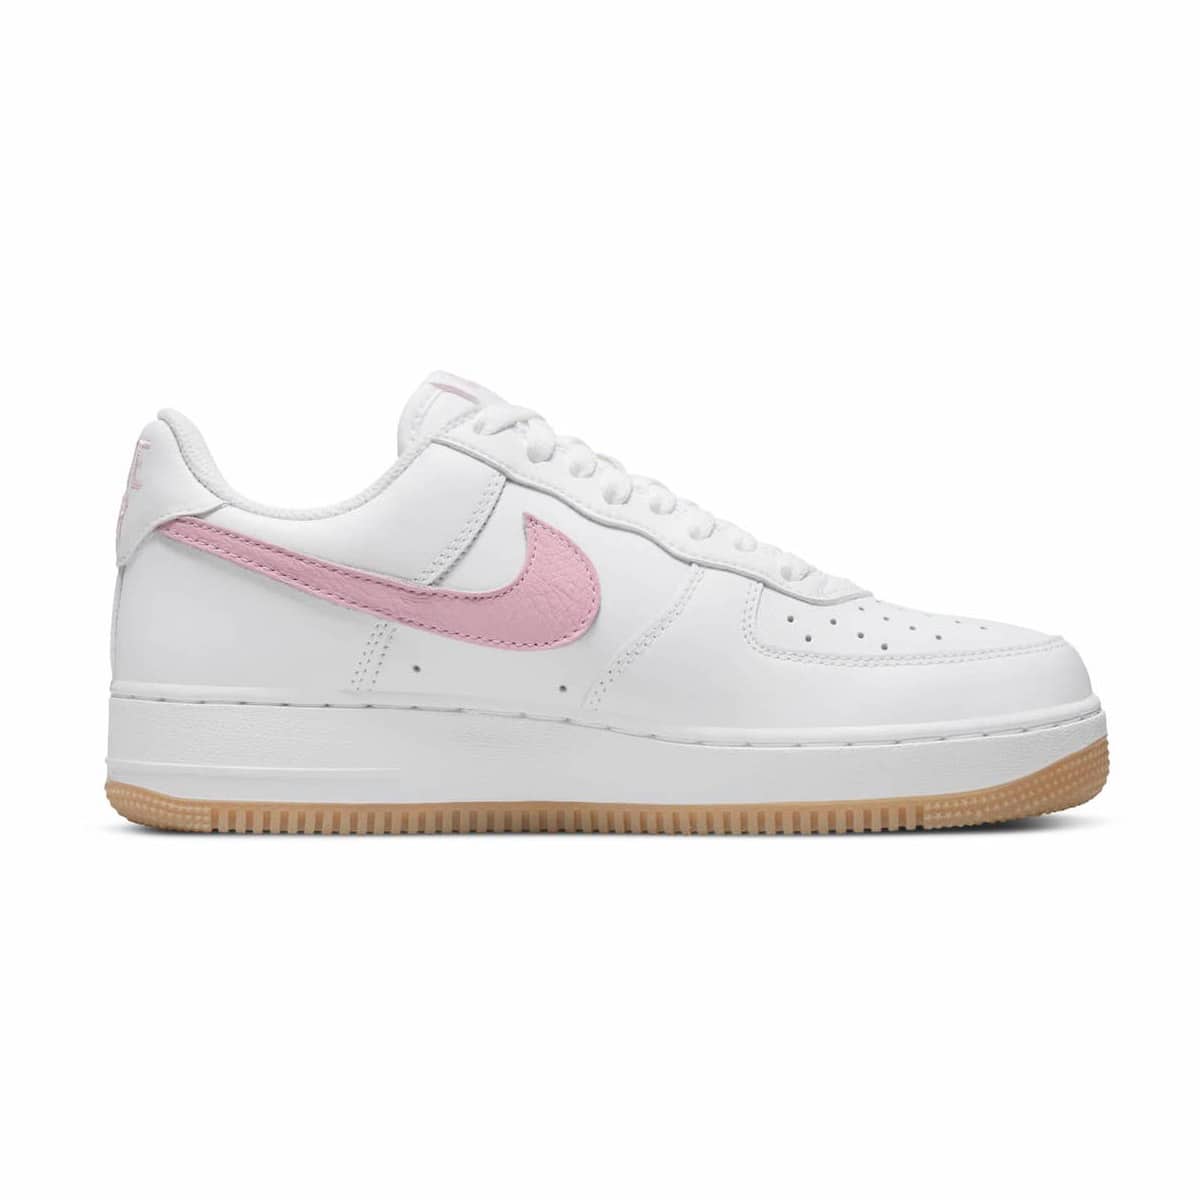 Nike Air Force 1 Low Color of the month White Pink DM0576-101 3